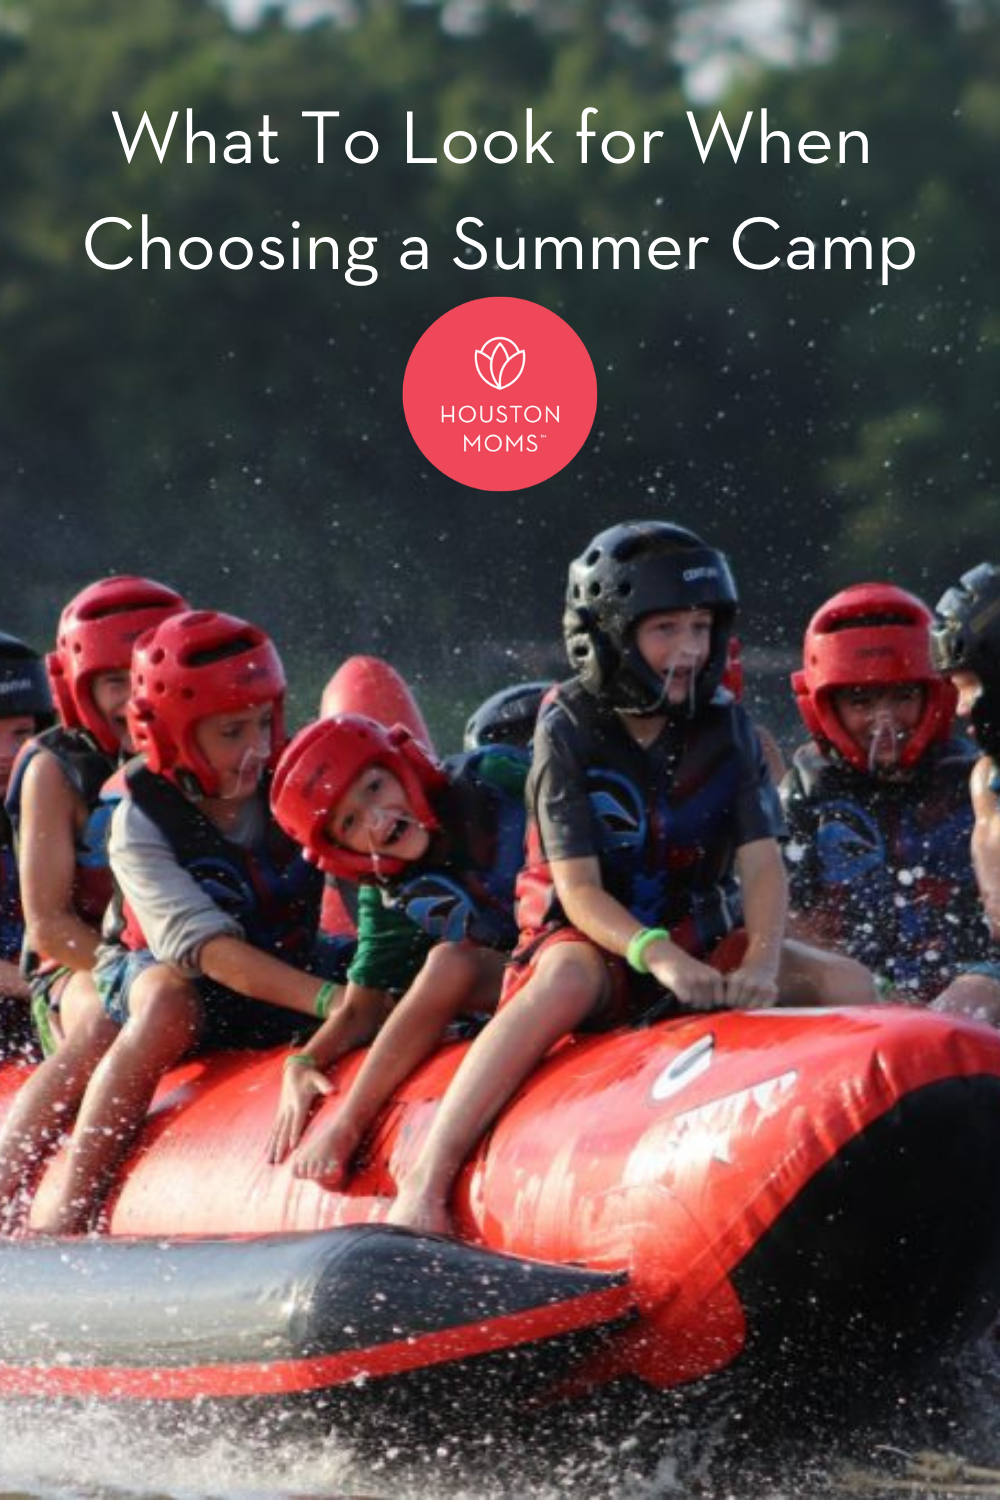 Houston Moms "What To Look for When Choosing a Summer Camp" #houstonmoms #momsaroundhouston